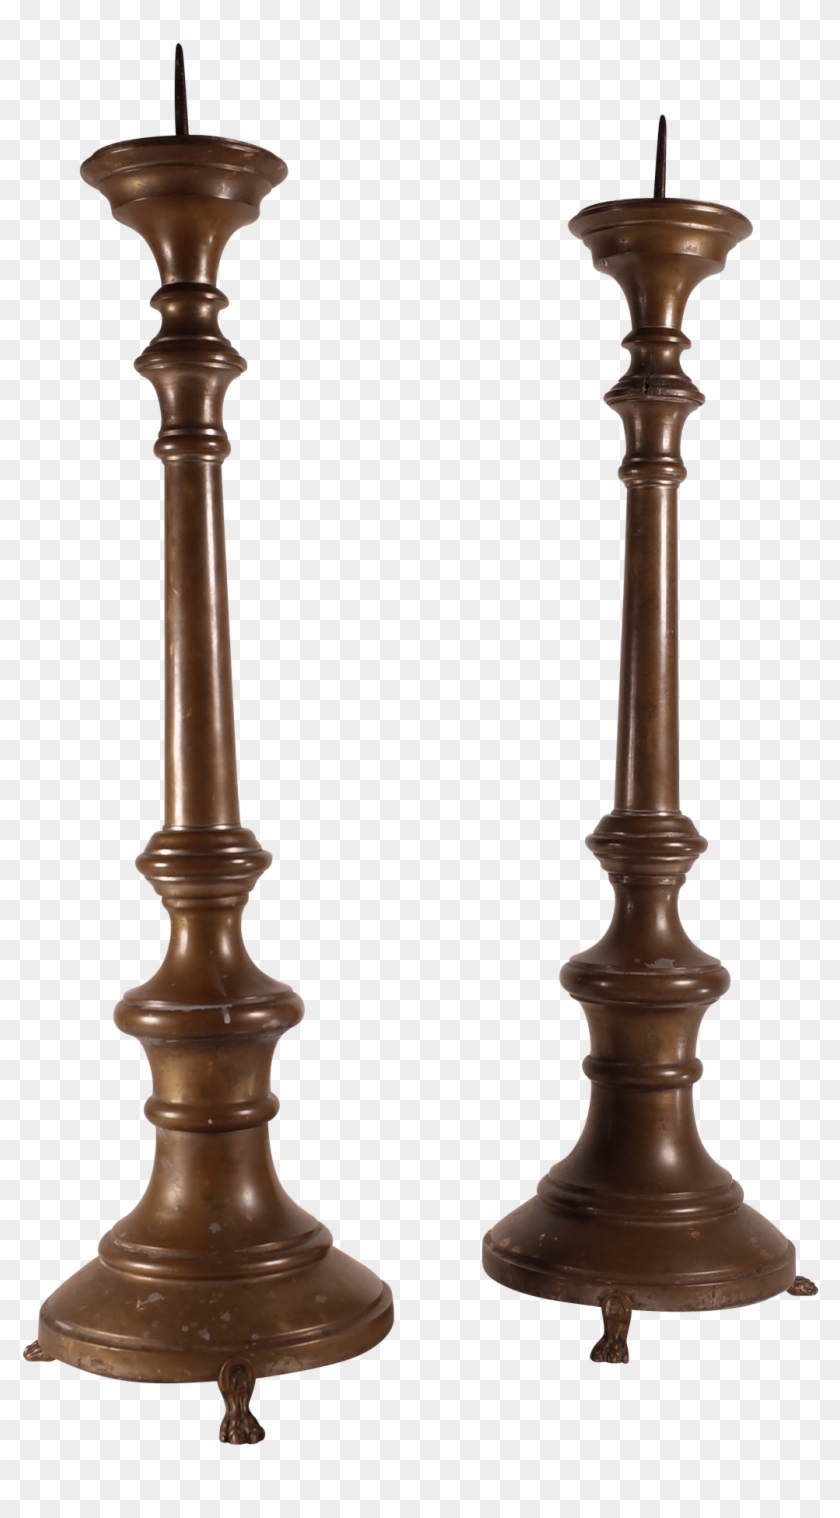 Pair Of Brass Prickets - Antique Clipart #4348967